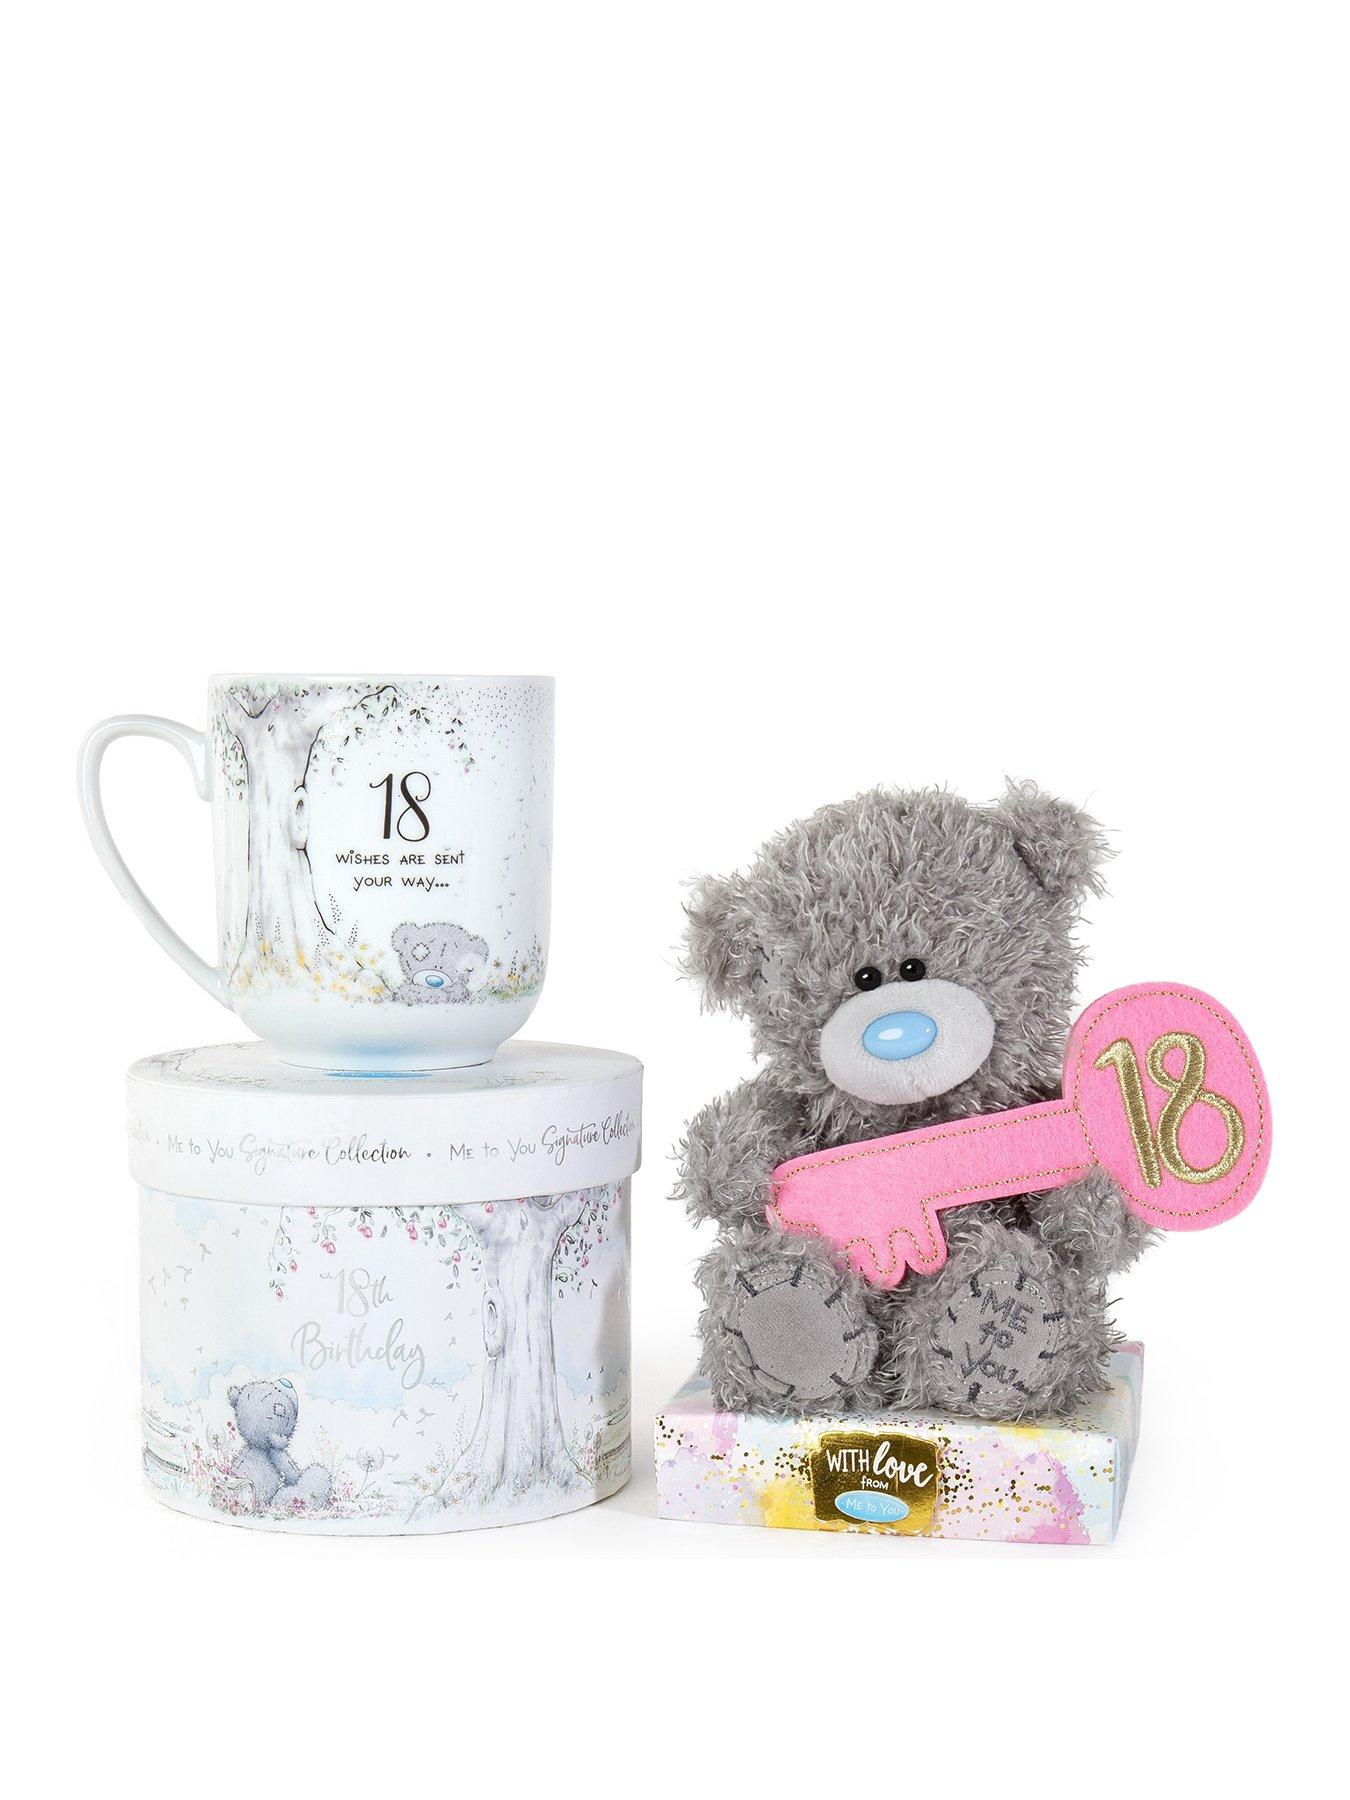 Tatty Teddy Amazing Daughter Mug Gift Boxed Me to You 